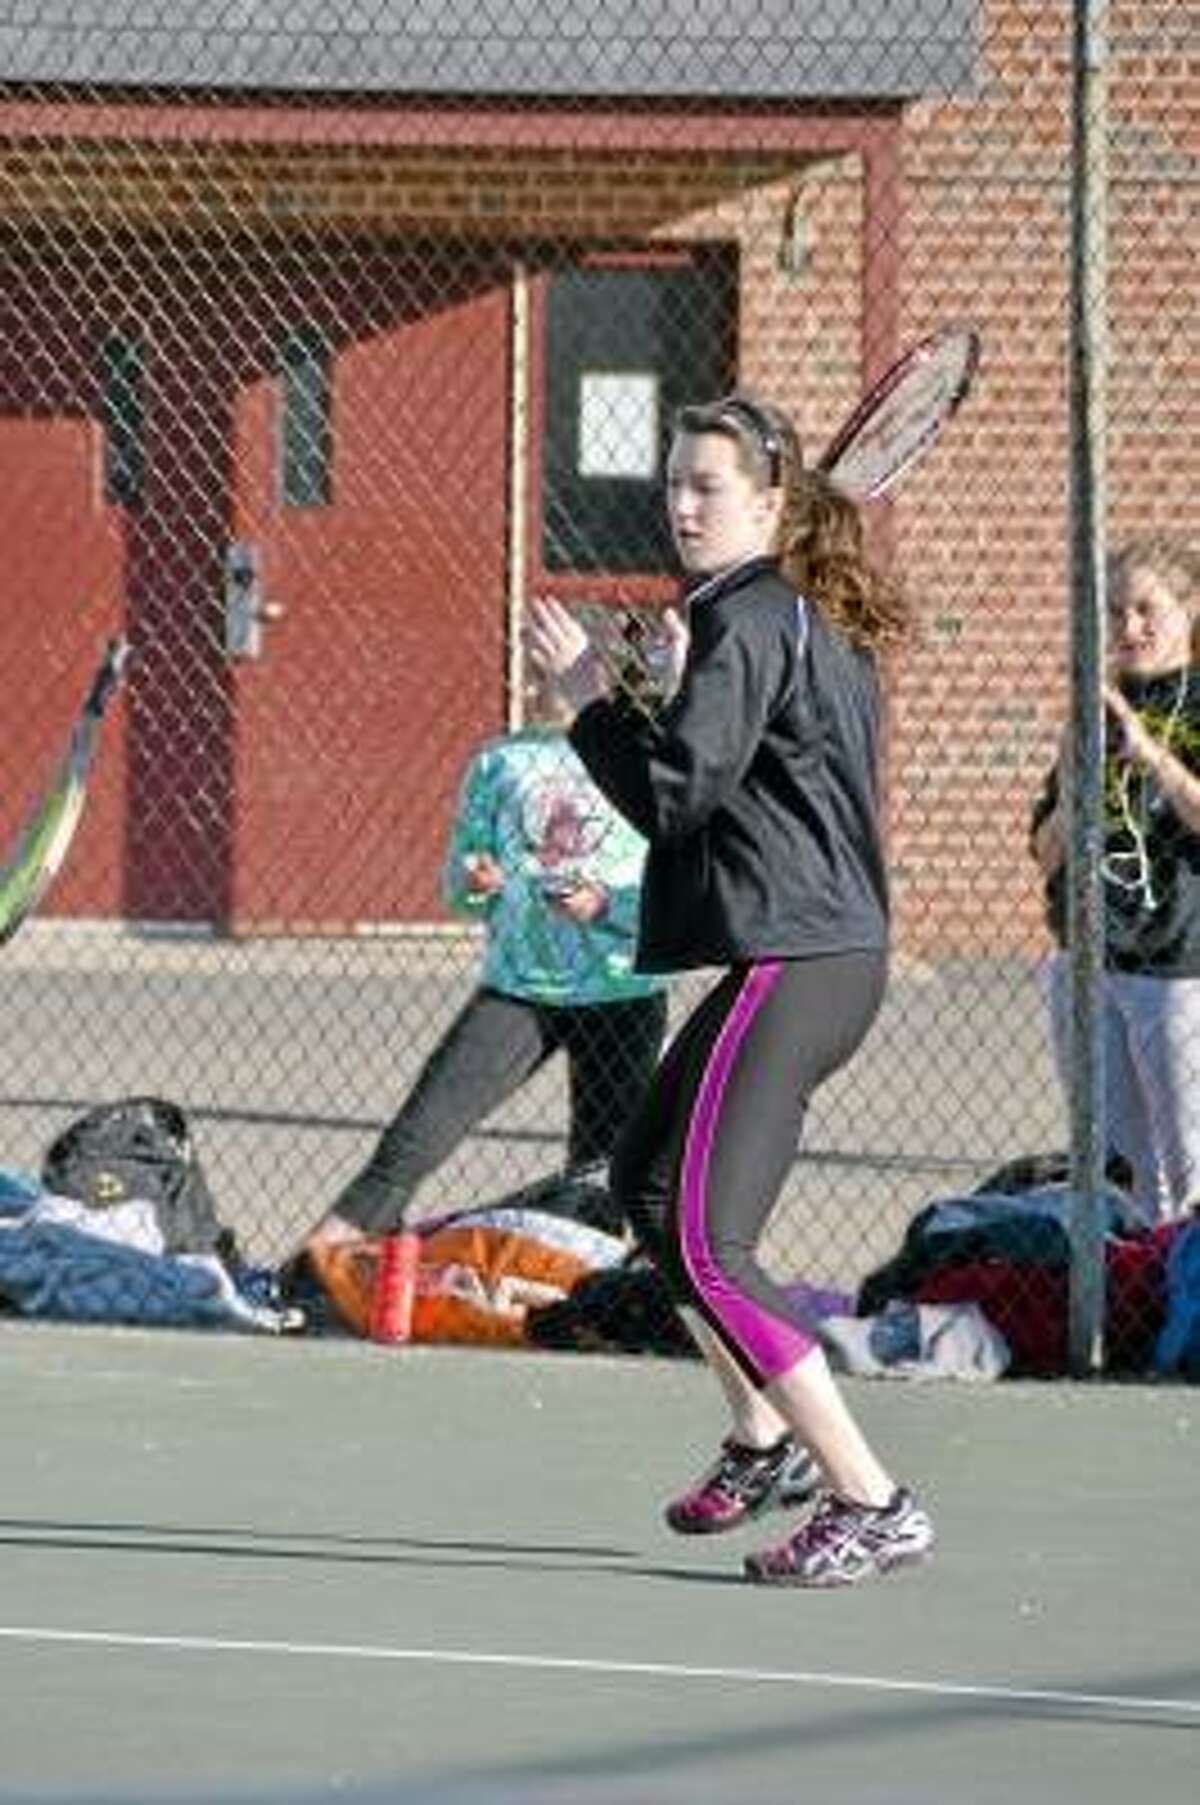 Pete Paguaga/Register Citizen Thomaston's Allison Snow, returning a serve during practice. She is slated to be the Golden Bears, number three in singles this season.